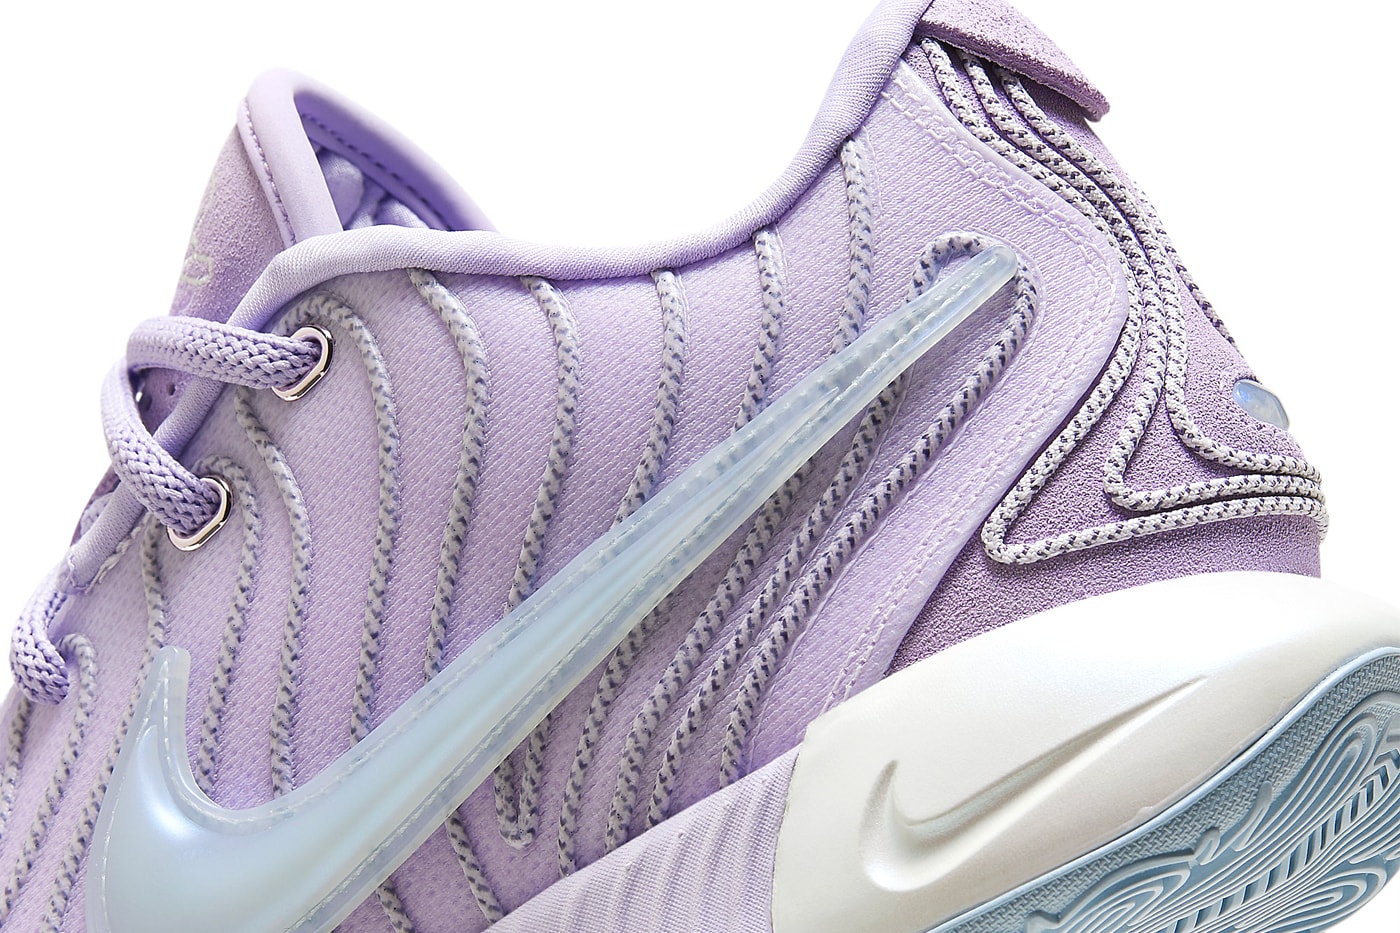 Nike LeBron 21 "Easter" HF5353-500 Release Info LeBron James Shop Online Drop Where to Buy 